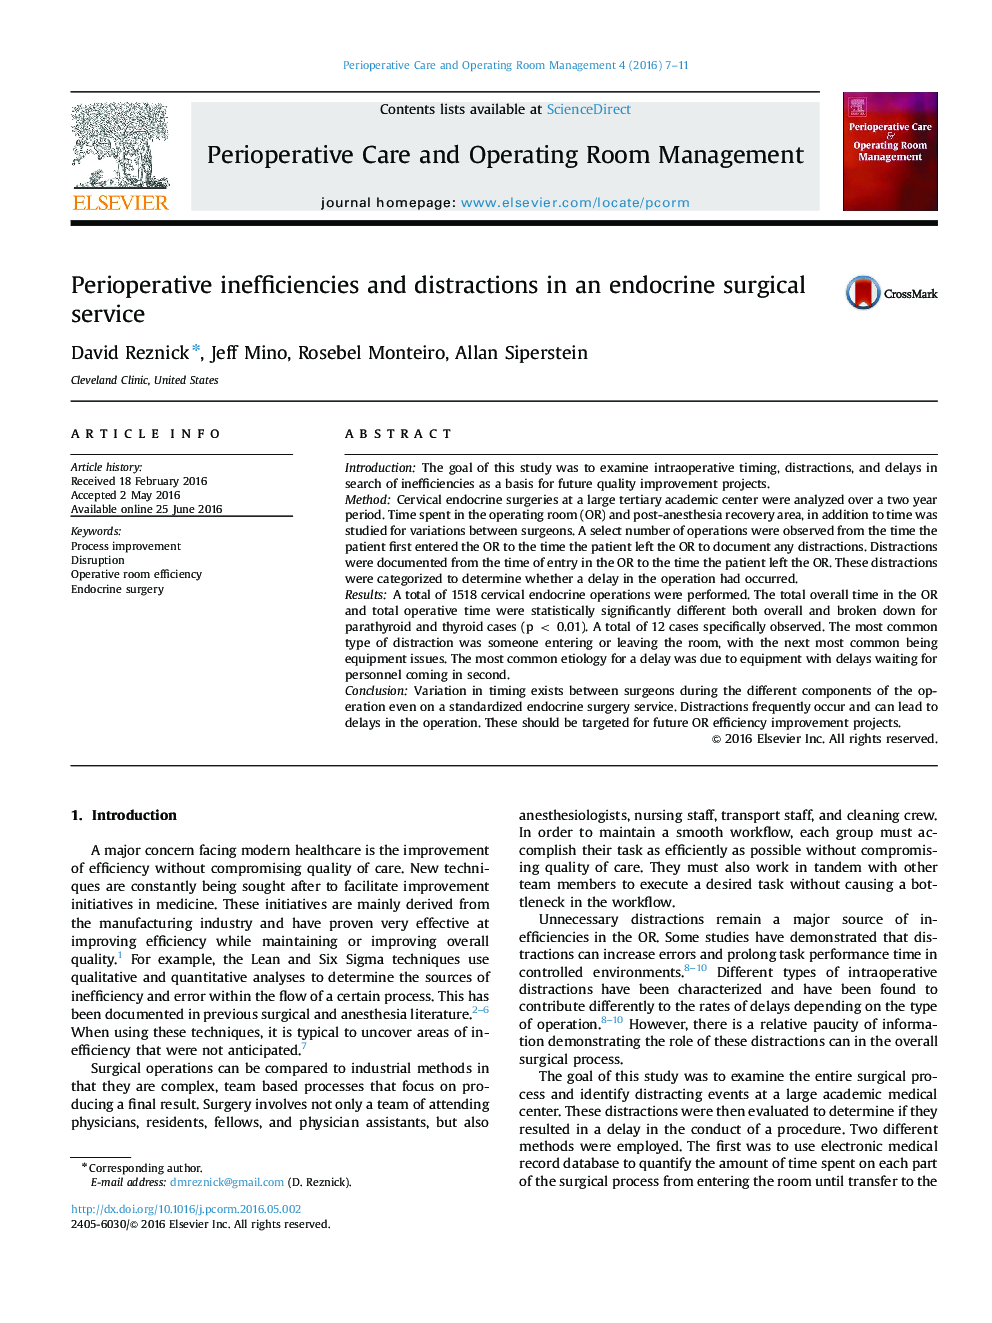 Perioperative inefficiencies and distractions in an endocrine surgical service